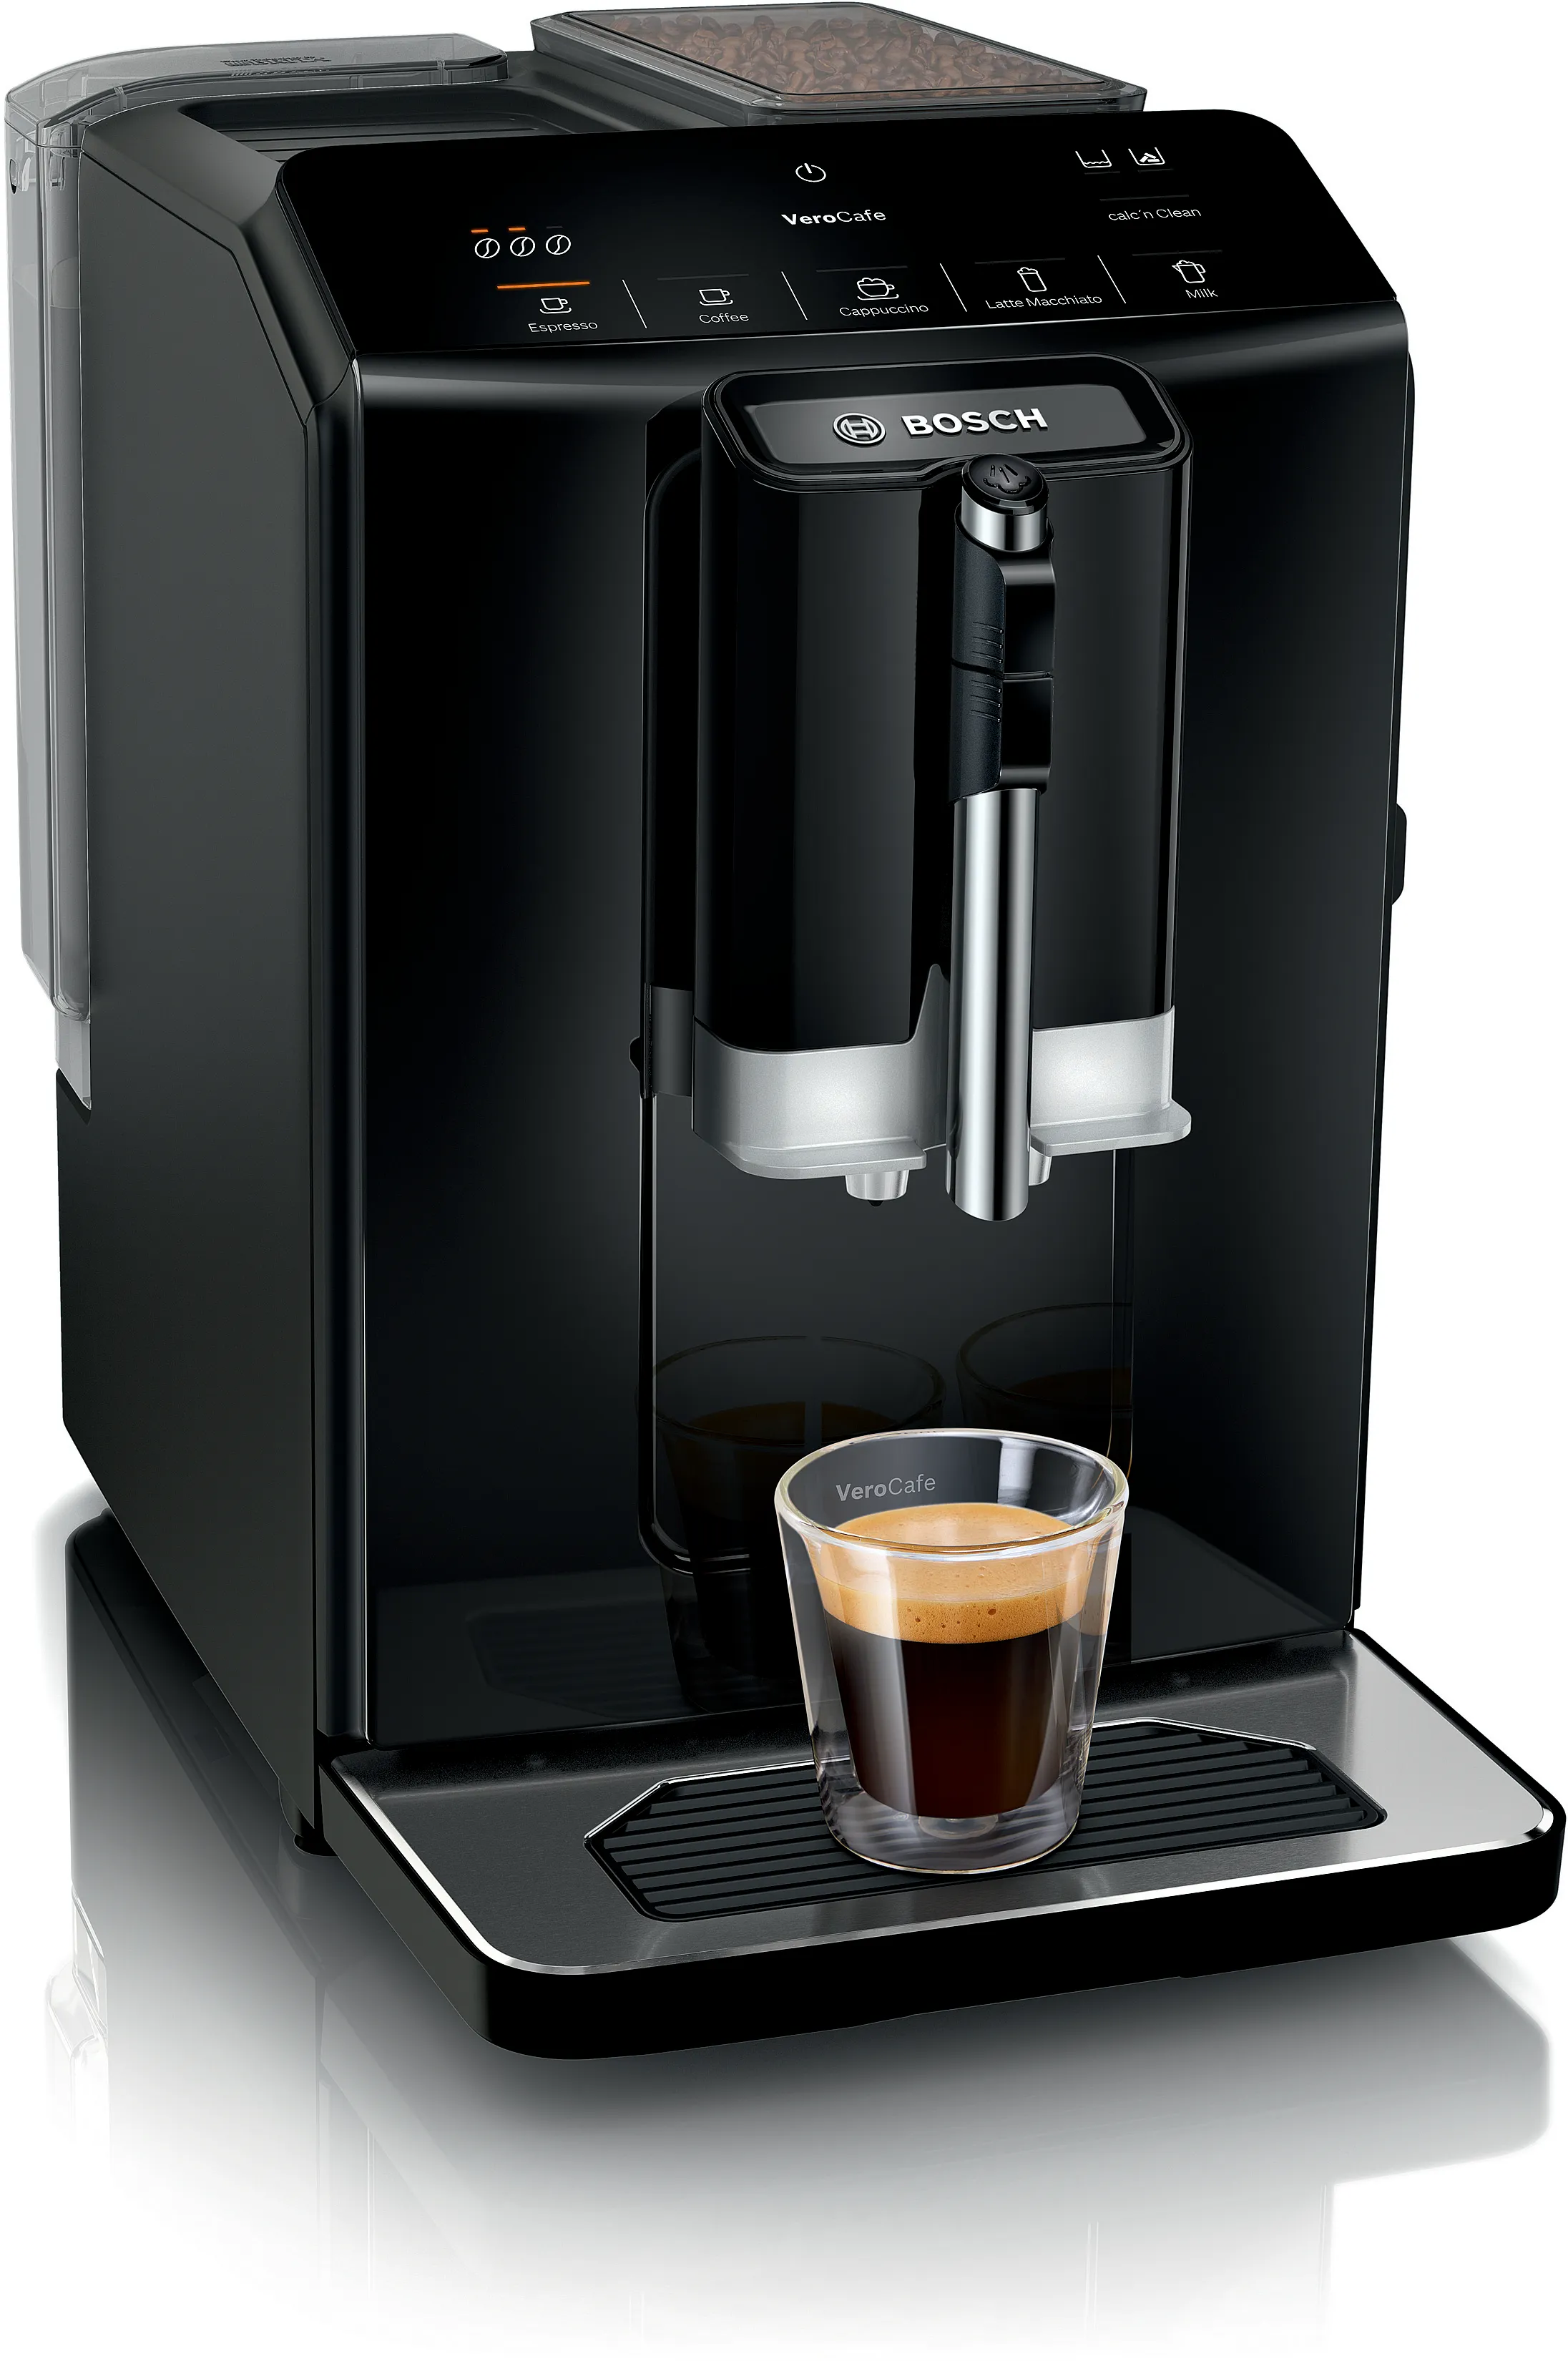 Series 2 Fully automatic coffee machine VeroCafe Piano black 